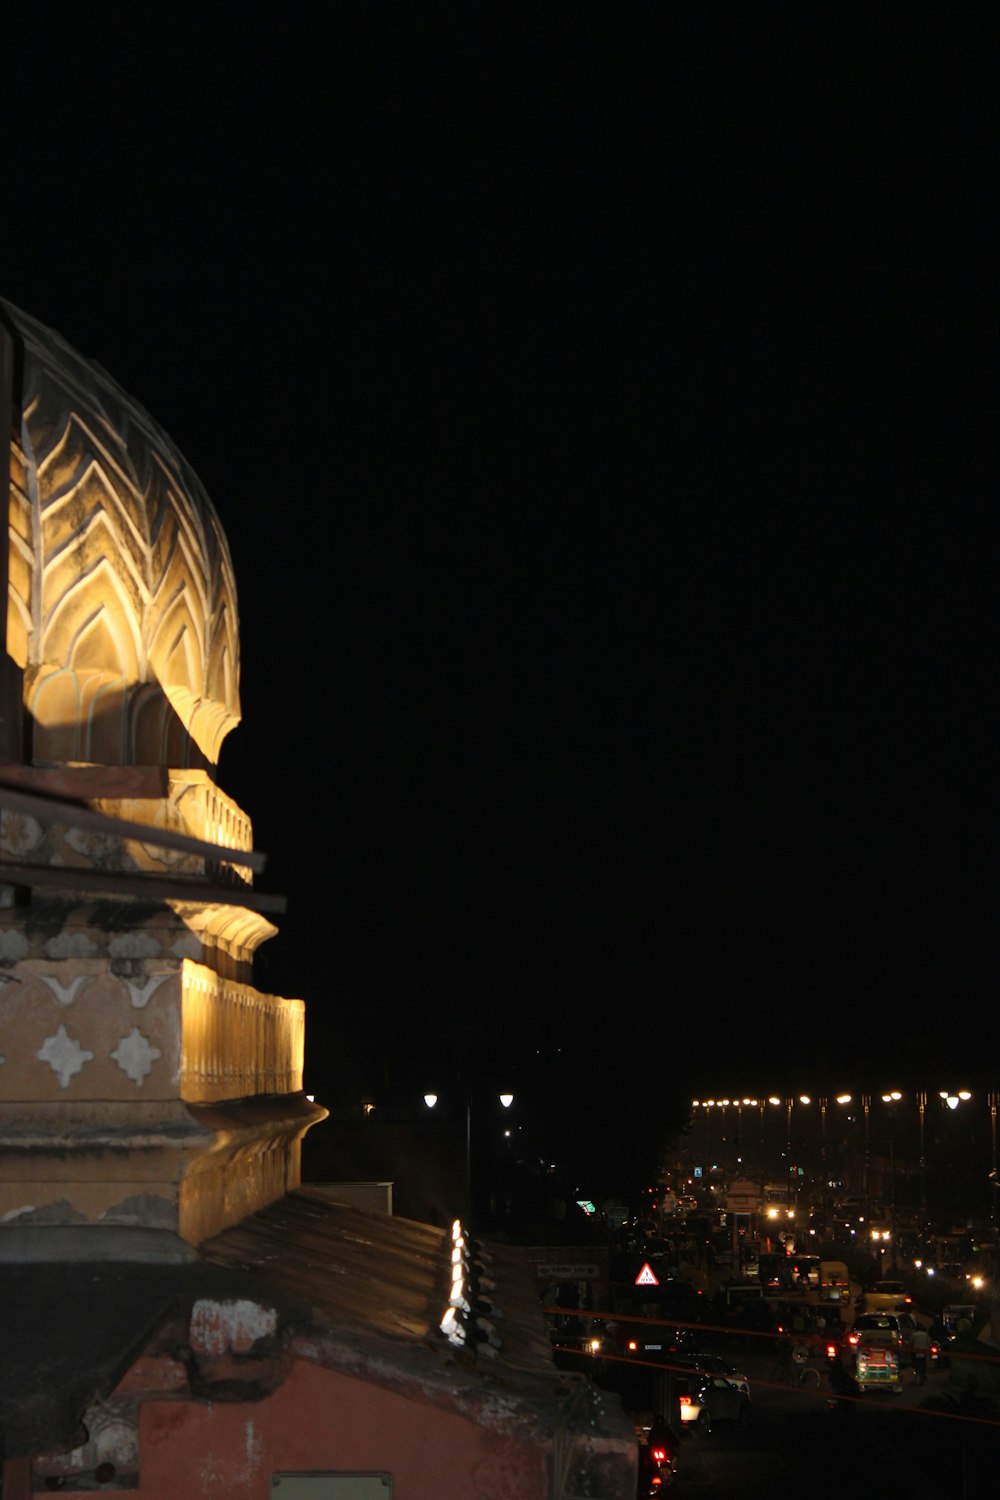 a large tower with a dome at night